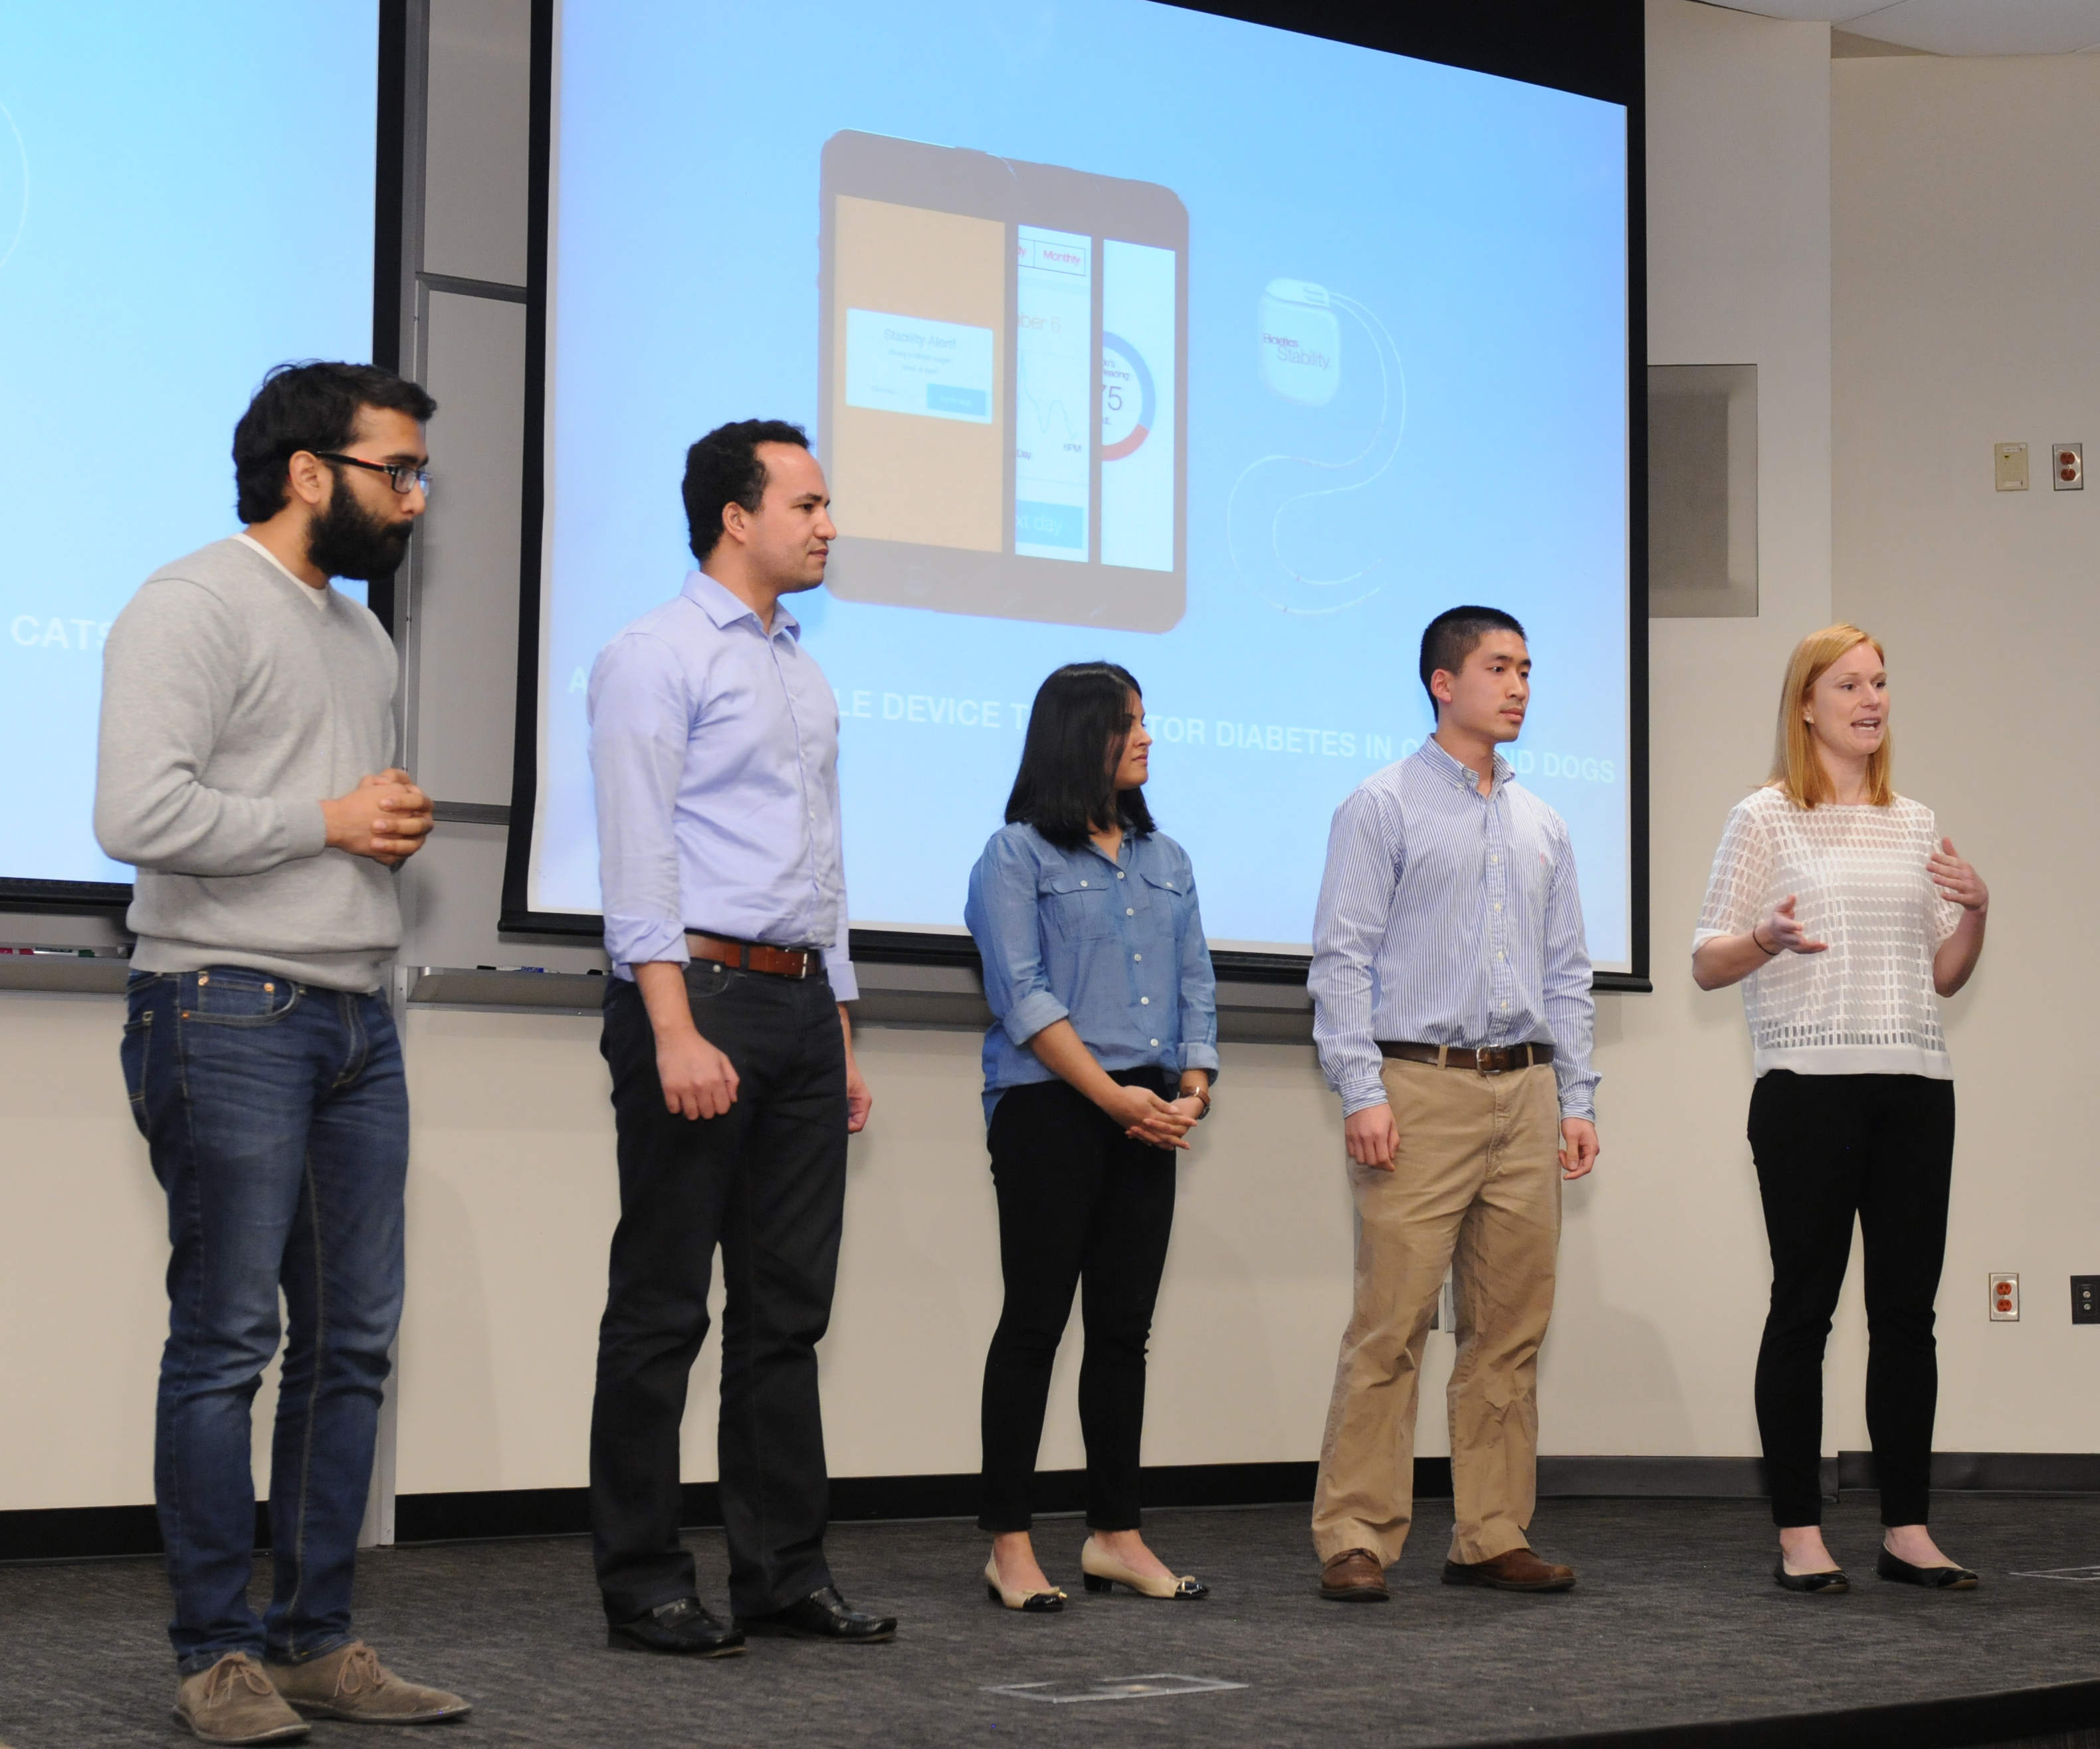 TI:GER team Bioletics presents its diabetes technology during the final round of the 2015 Georgia Tech Startup Competition at Georgia Tech Scheller College of Business.